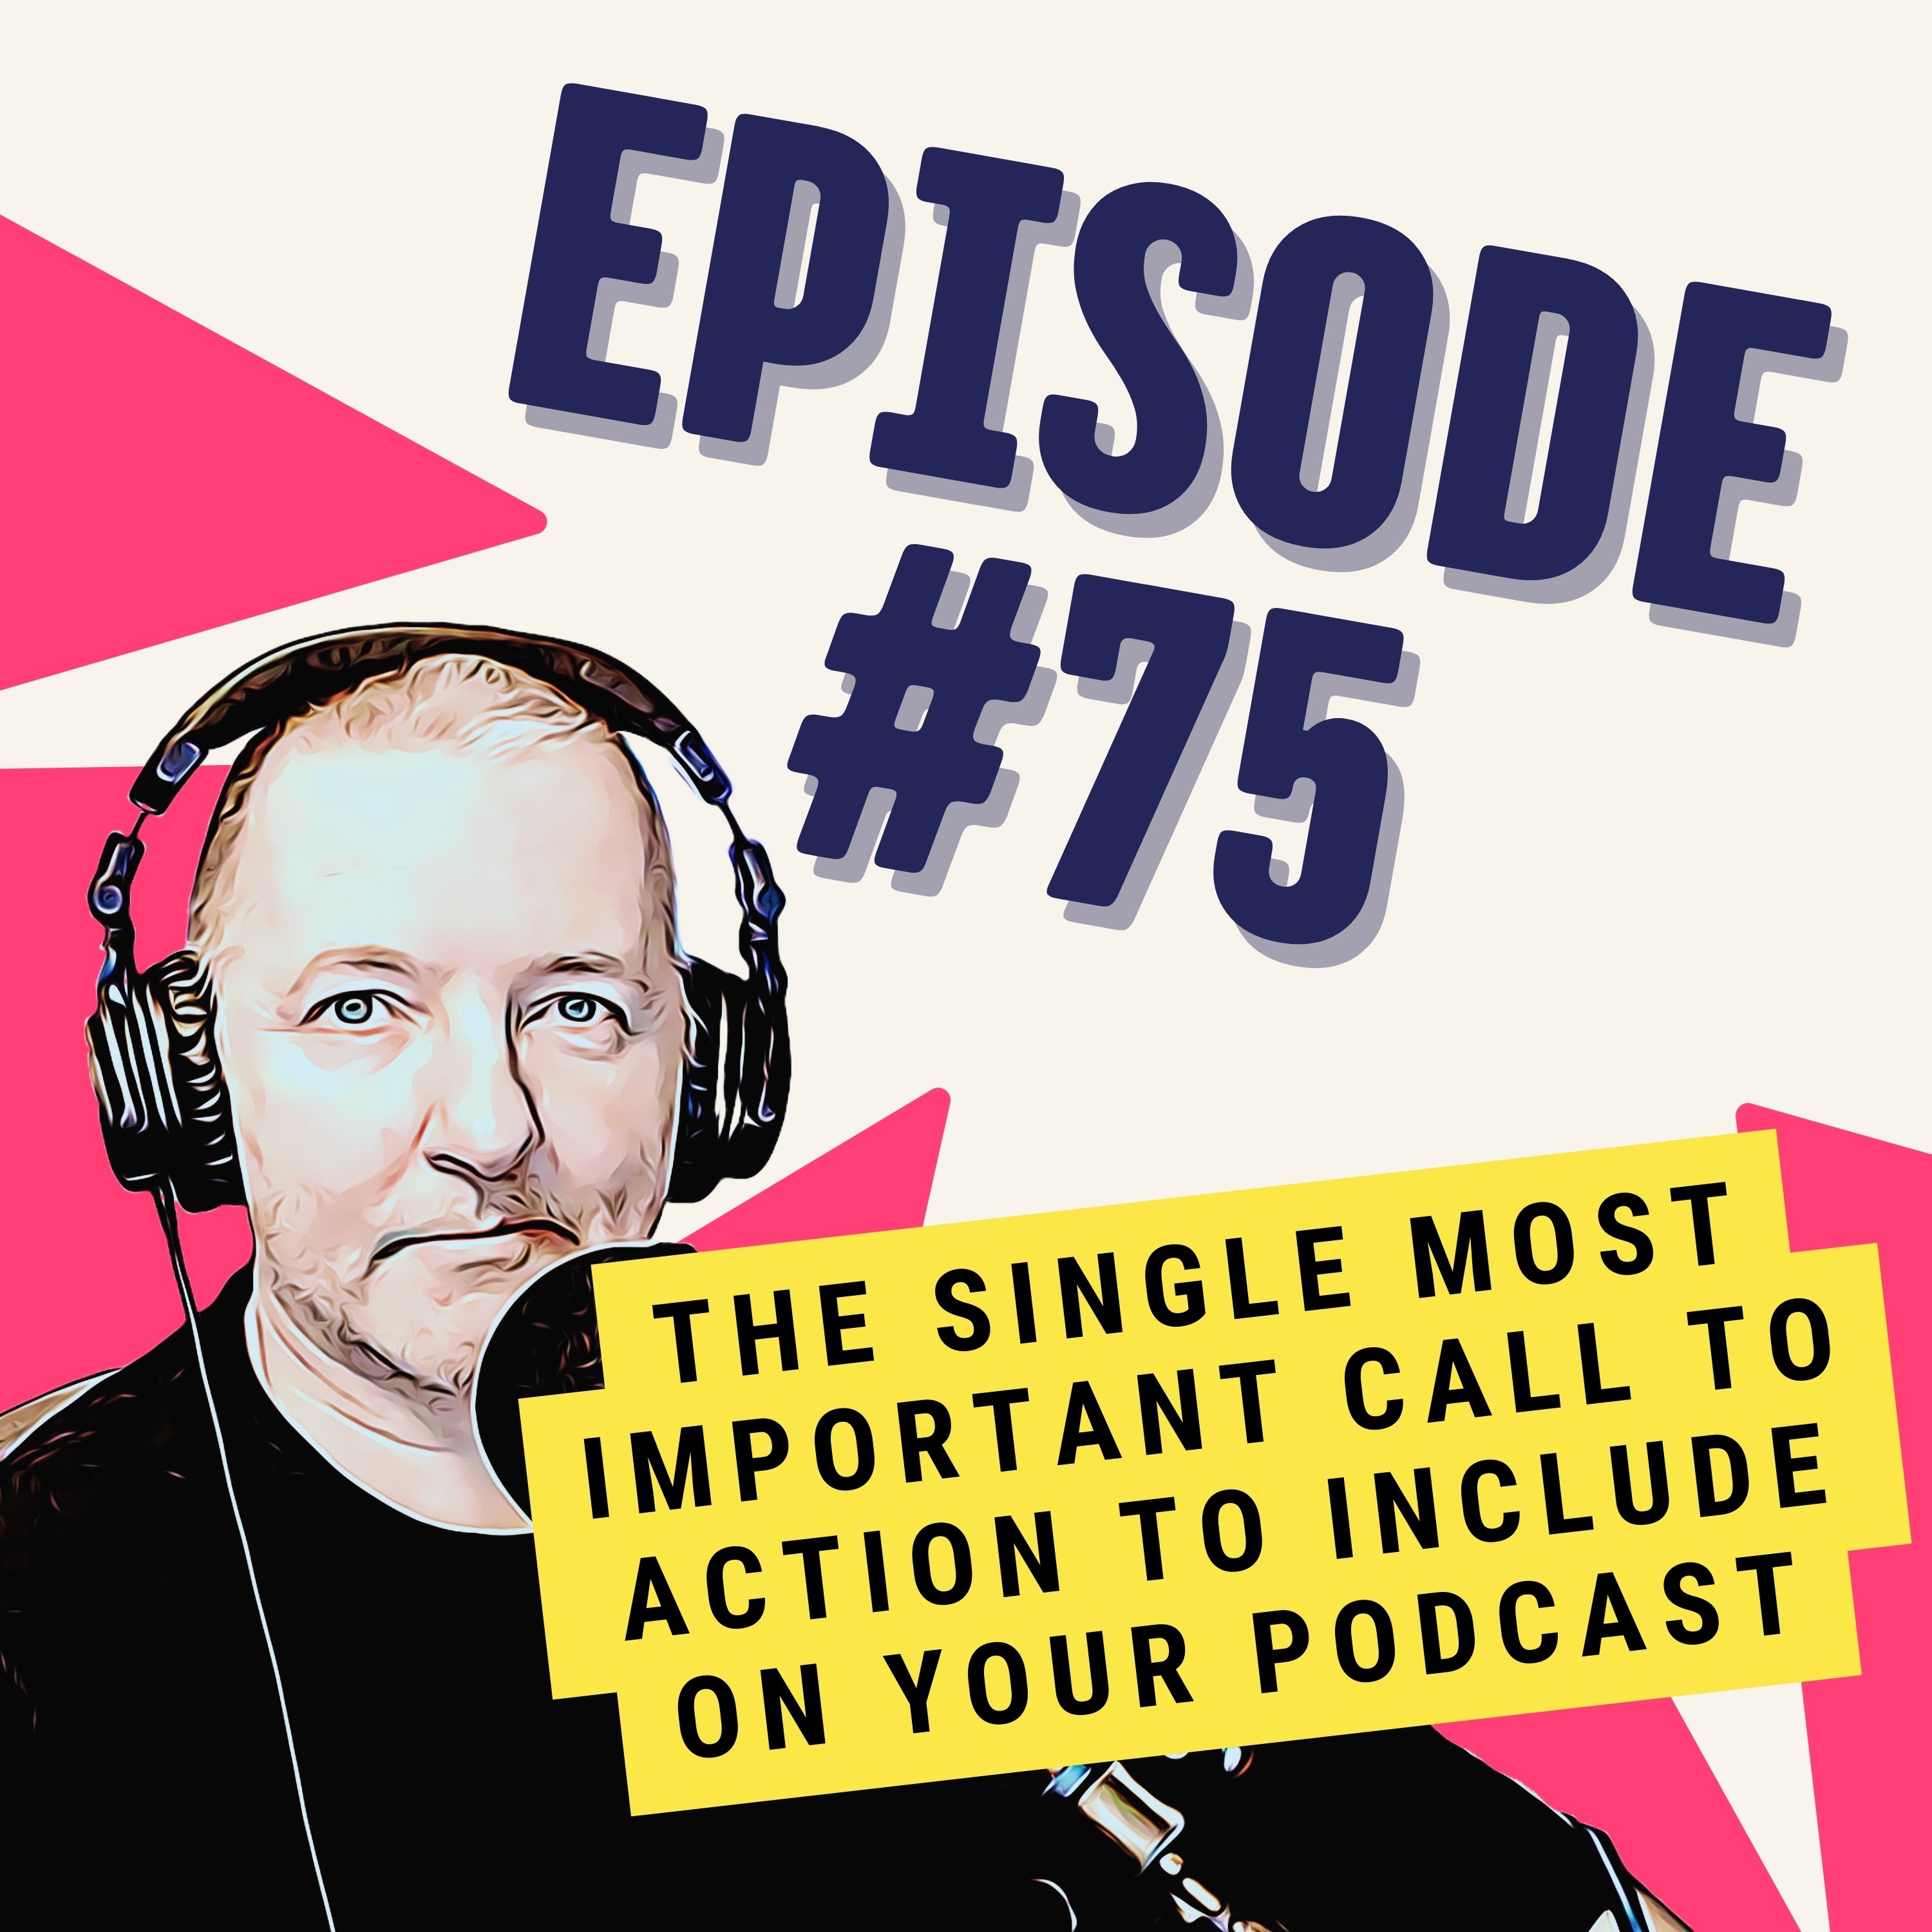 The Single Most Important Call to Action to Include on Your Podcast